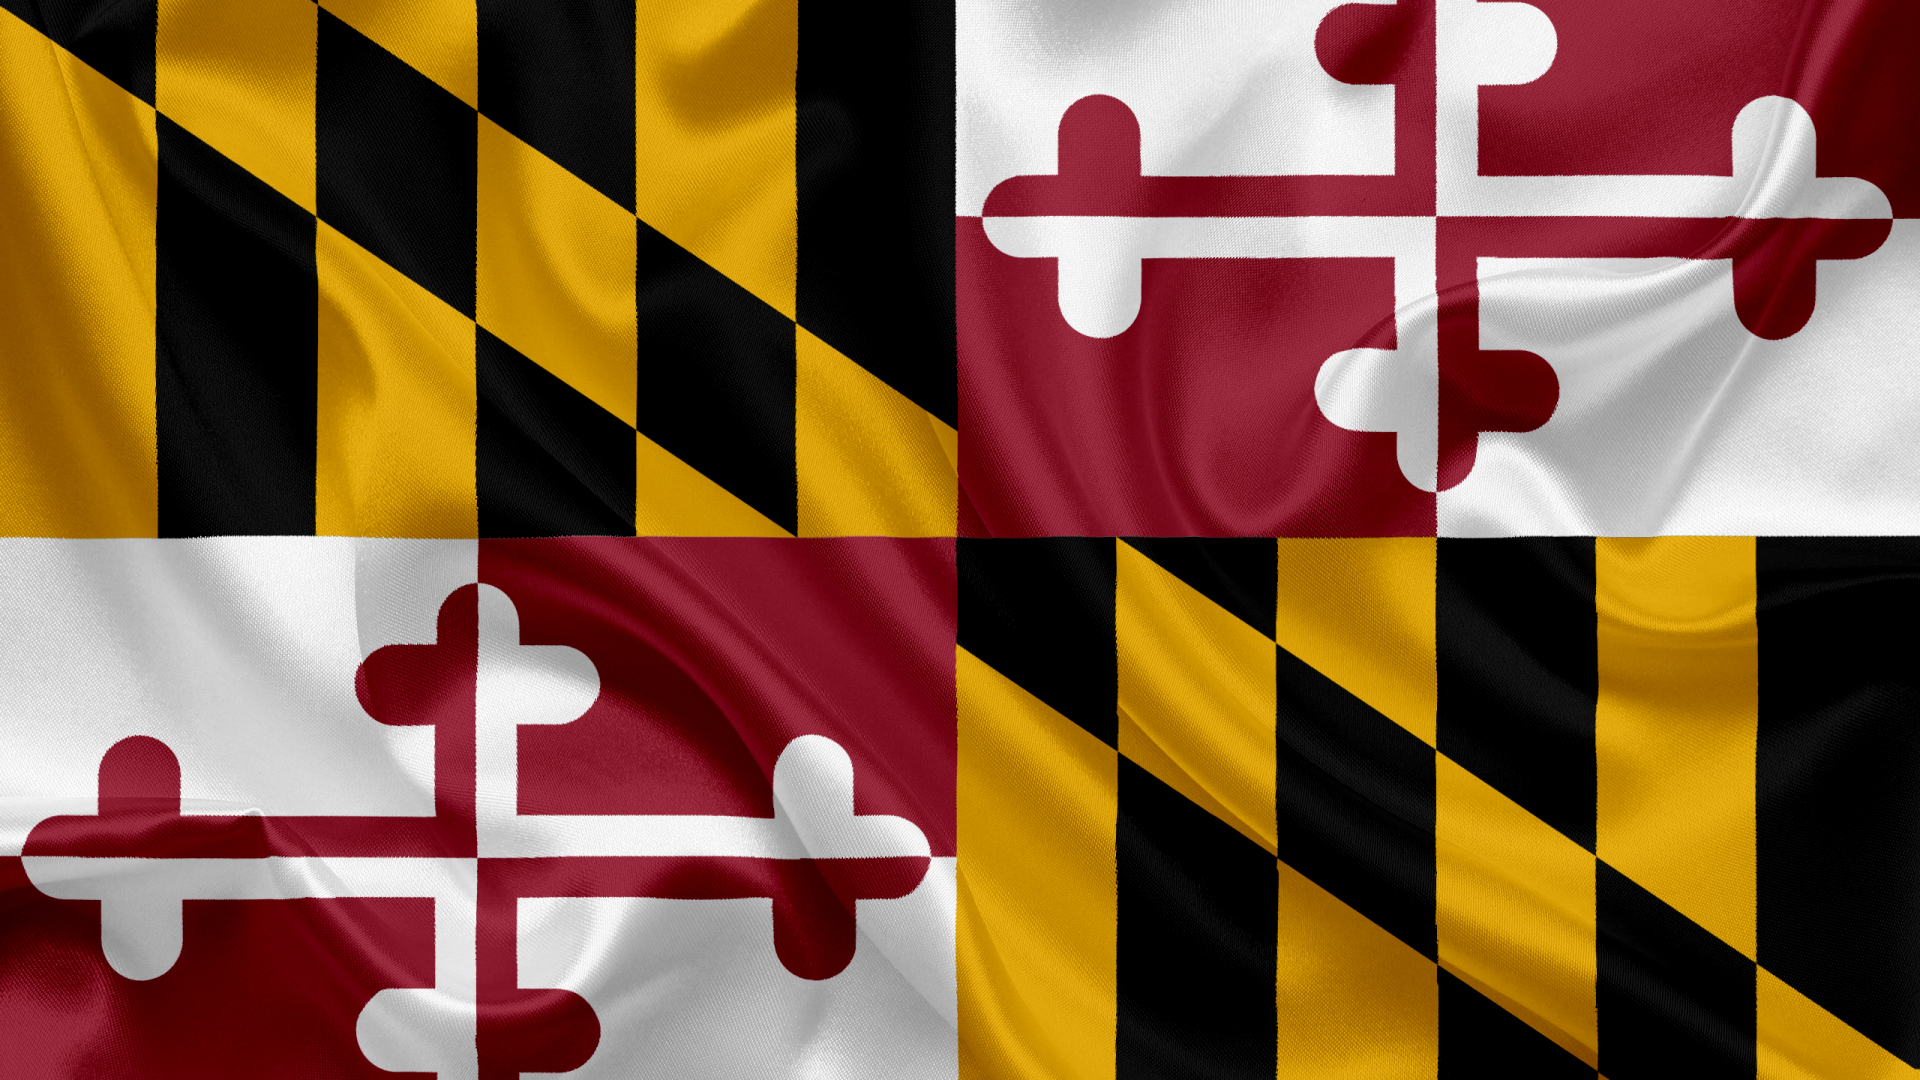 Maryland Flag Wallpapers - Wallpaper Cave.